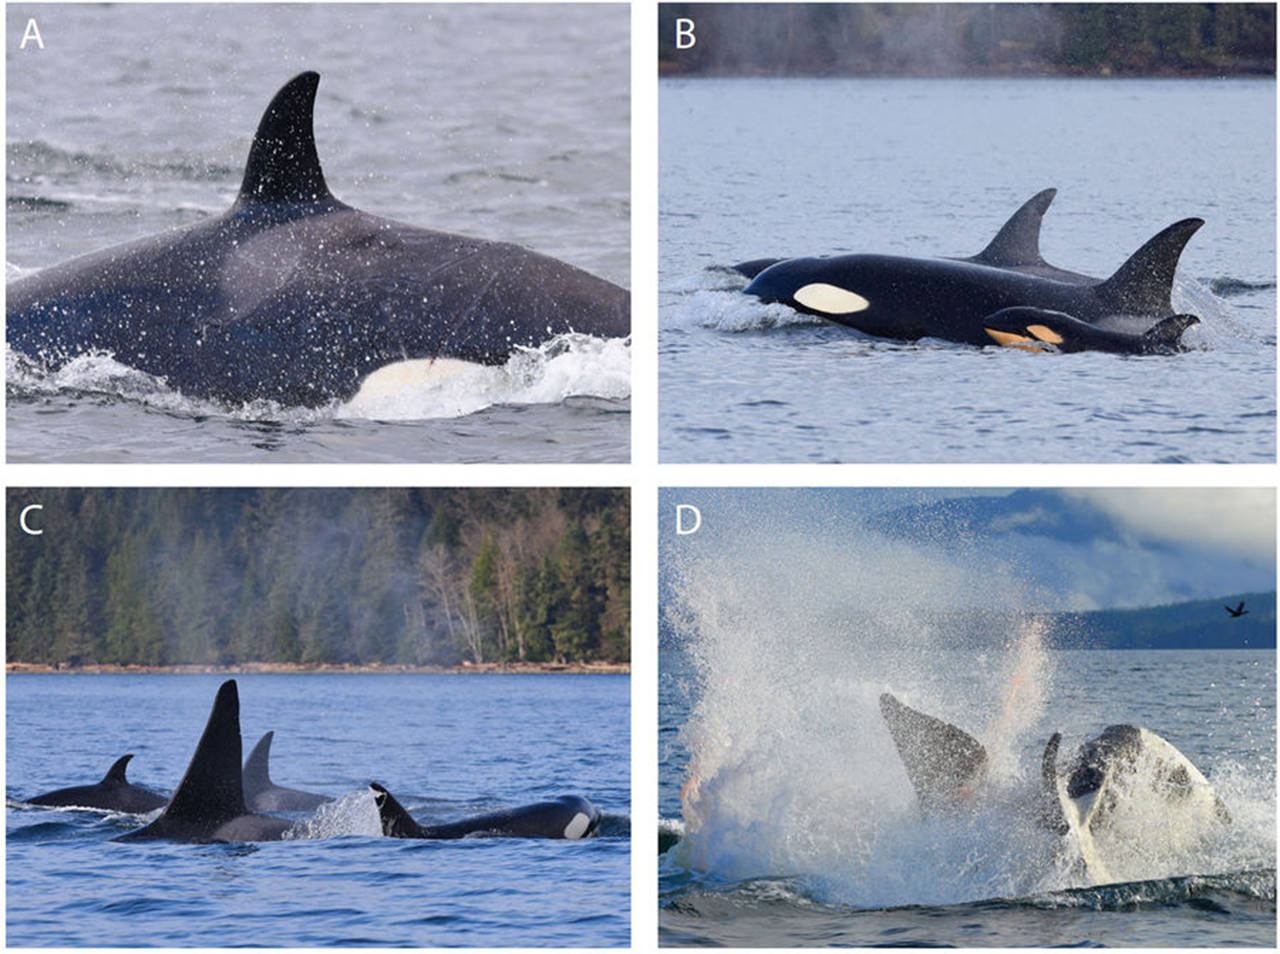 Contributed photos                                Observations leading to infanticide. (A) Fresh wounds on left flank and kinked spine anterior to dorsal fin of the approximately 3-year-old orca. (B) Calf with its mother and sister. (C) Circling orcas. (D) The calf’s mother ramming the adult male orca from below sending spray and blood into the air.